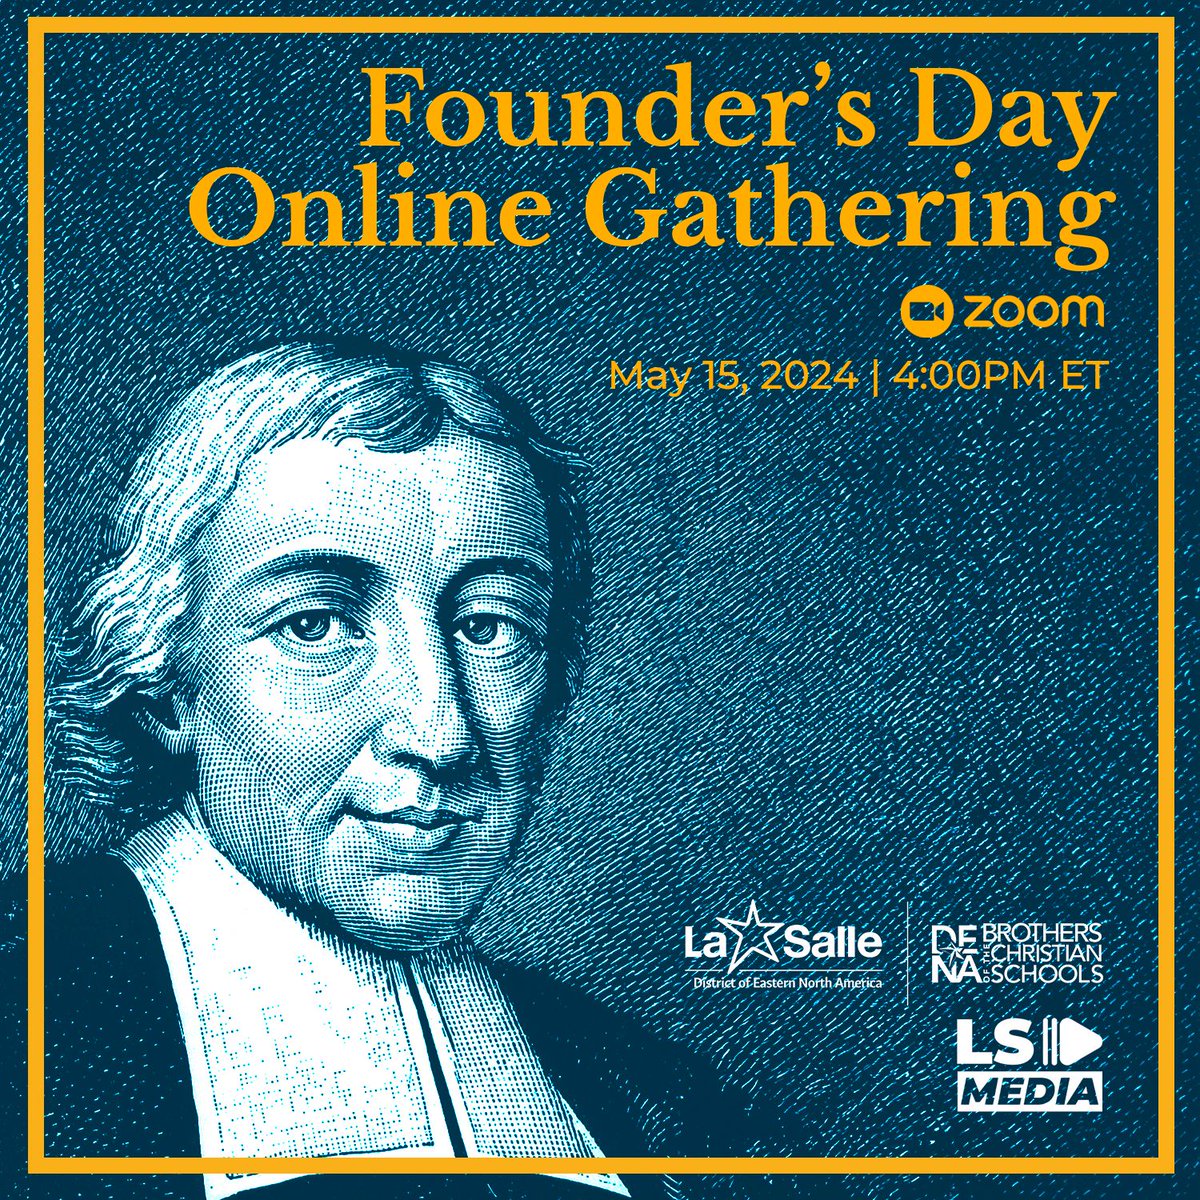 SAVE THE DATE for the DENA Founder’s Day Online Gathering on May 15, 2024, 4:00PM ET. 🌟

The program will highlight shared reflections from different Lasallian perspectives and a prayer service. More info about the meeting will be shared soon. Stay tuned! #WeAreLaSalle #FSCDENA